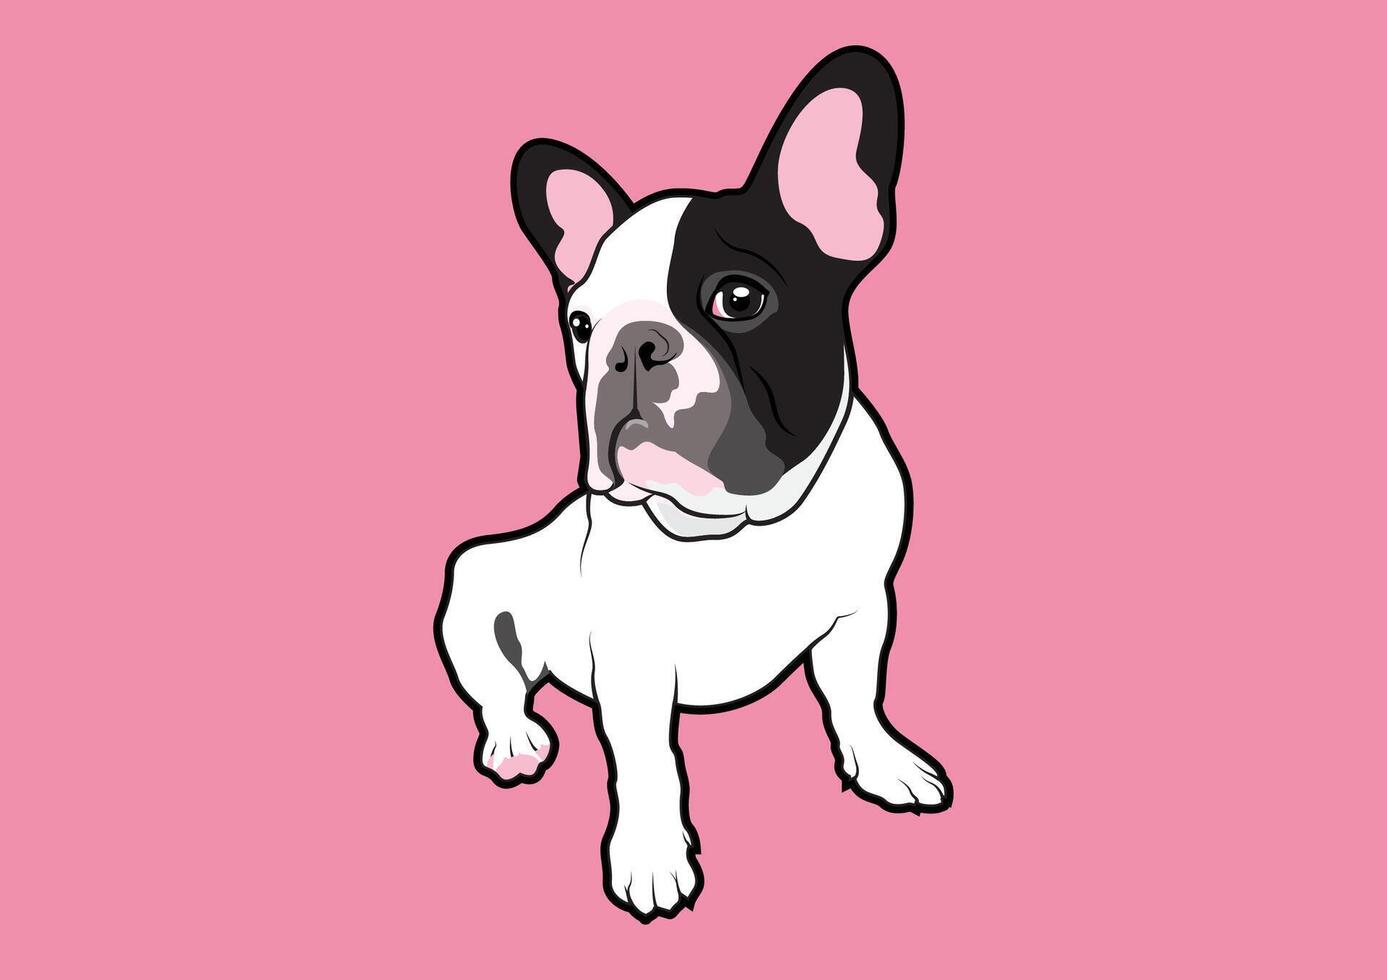 A cute French Bulldog is sitting on a pink background vector